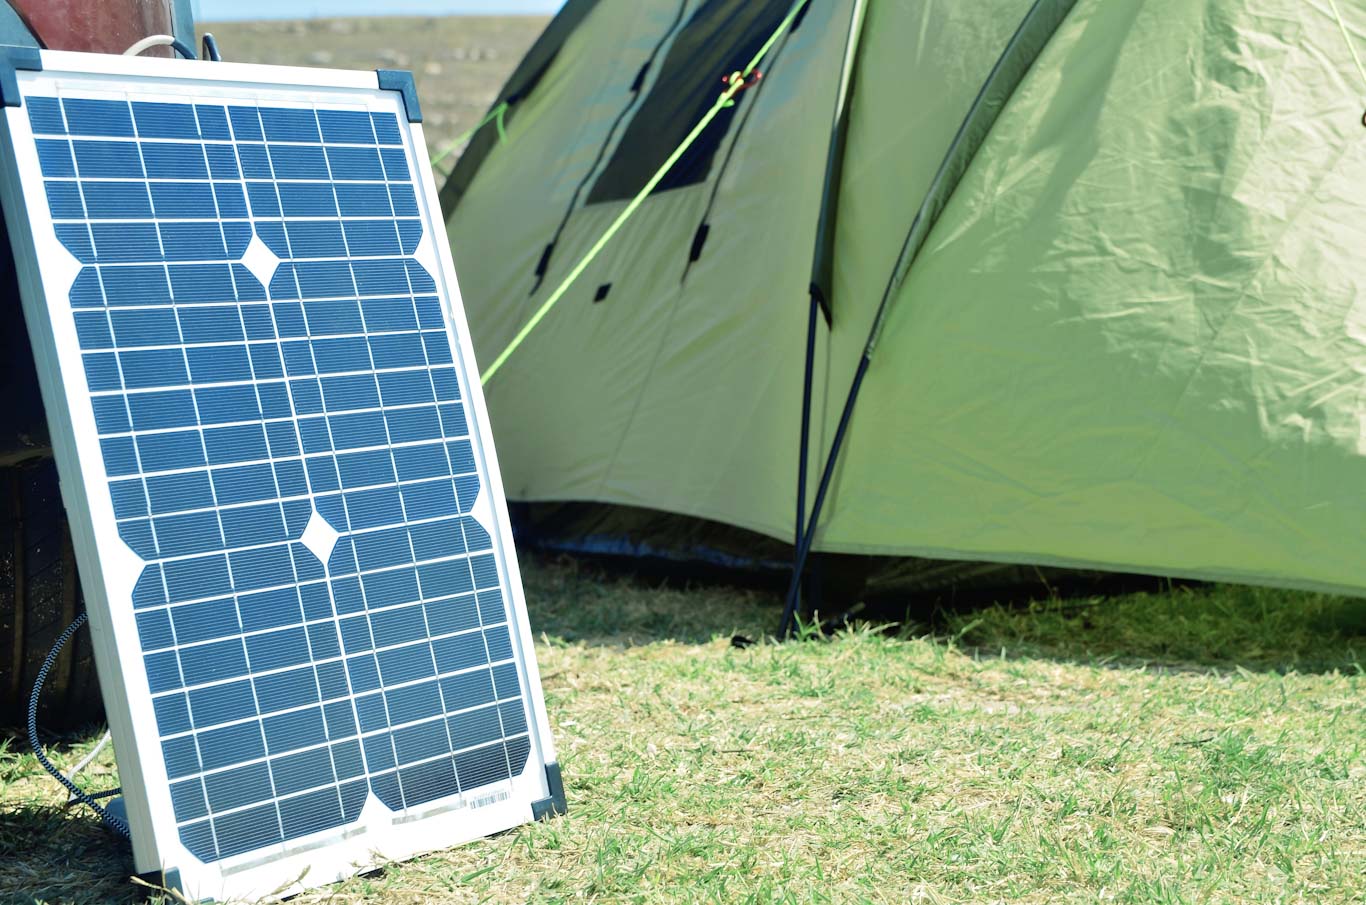 Solar panel and a camping tent